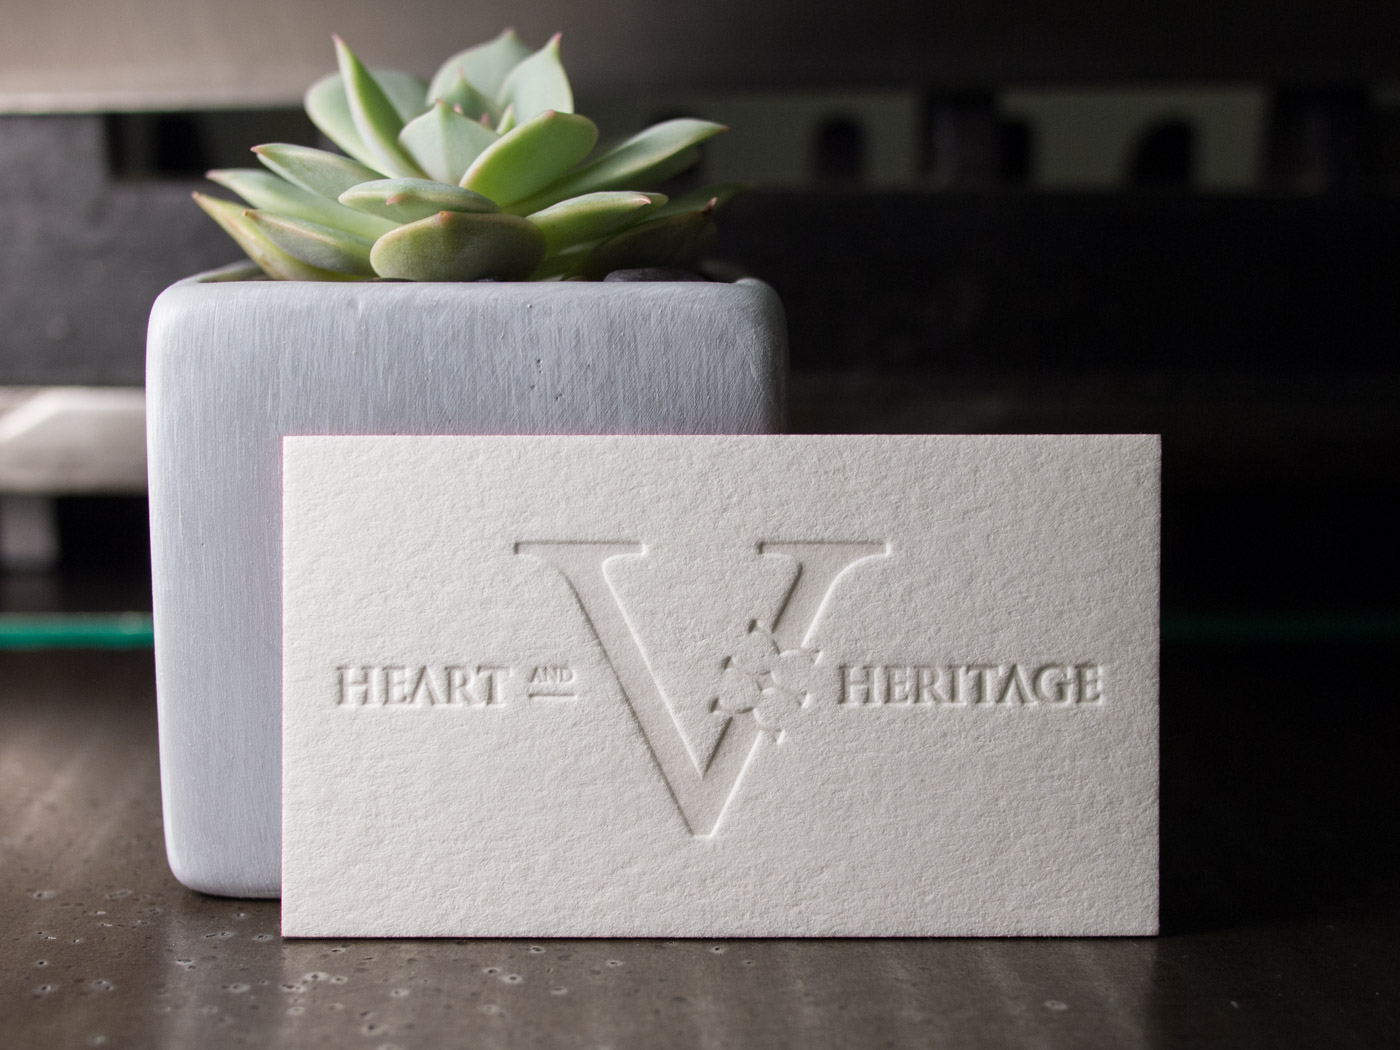 Virile Heart and Heritage | Printed by Parklife Press